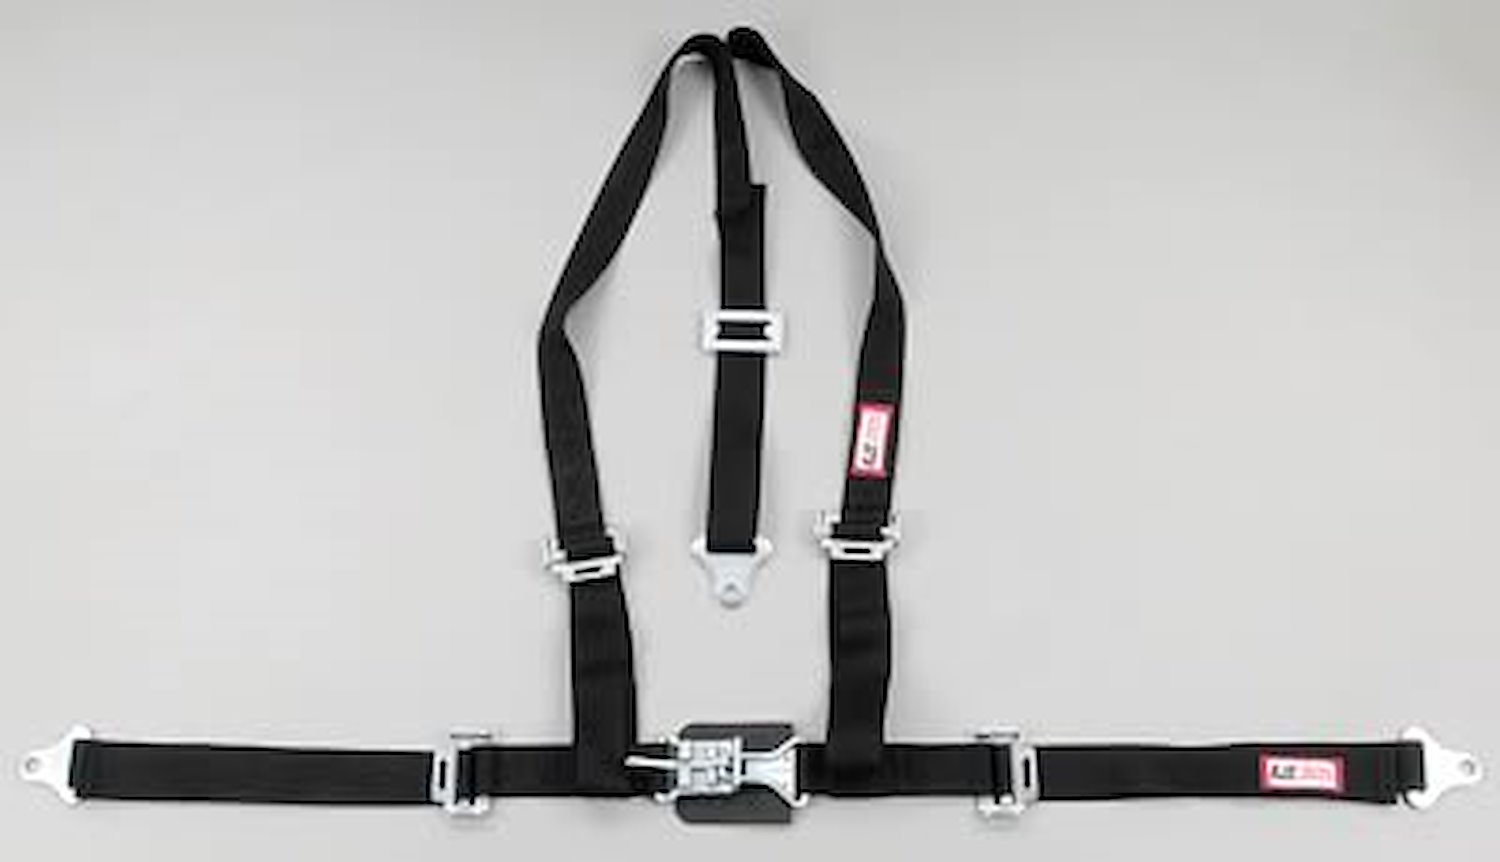 NON-SFI L&L HARNESS 3 PULL DOWN Lap Belt SEWN IN 2 S.H. Individual ROLL BAR Mount w/STERNUM STRAP ALL WRAP ENDS GRAY